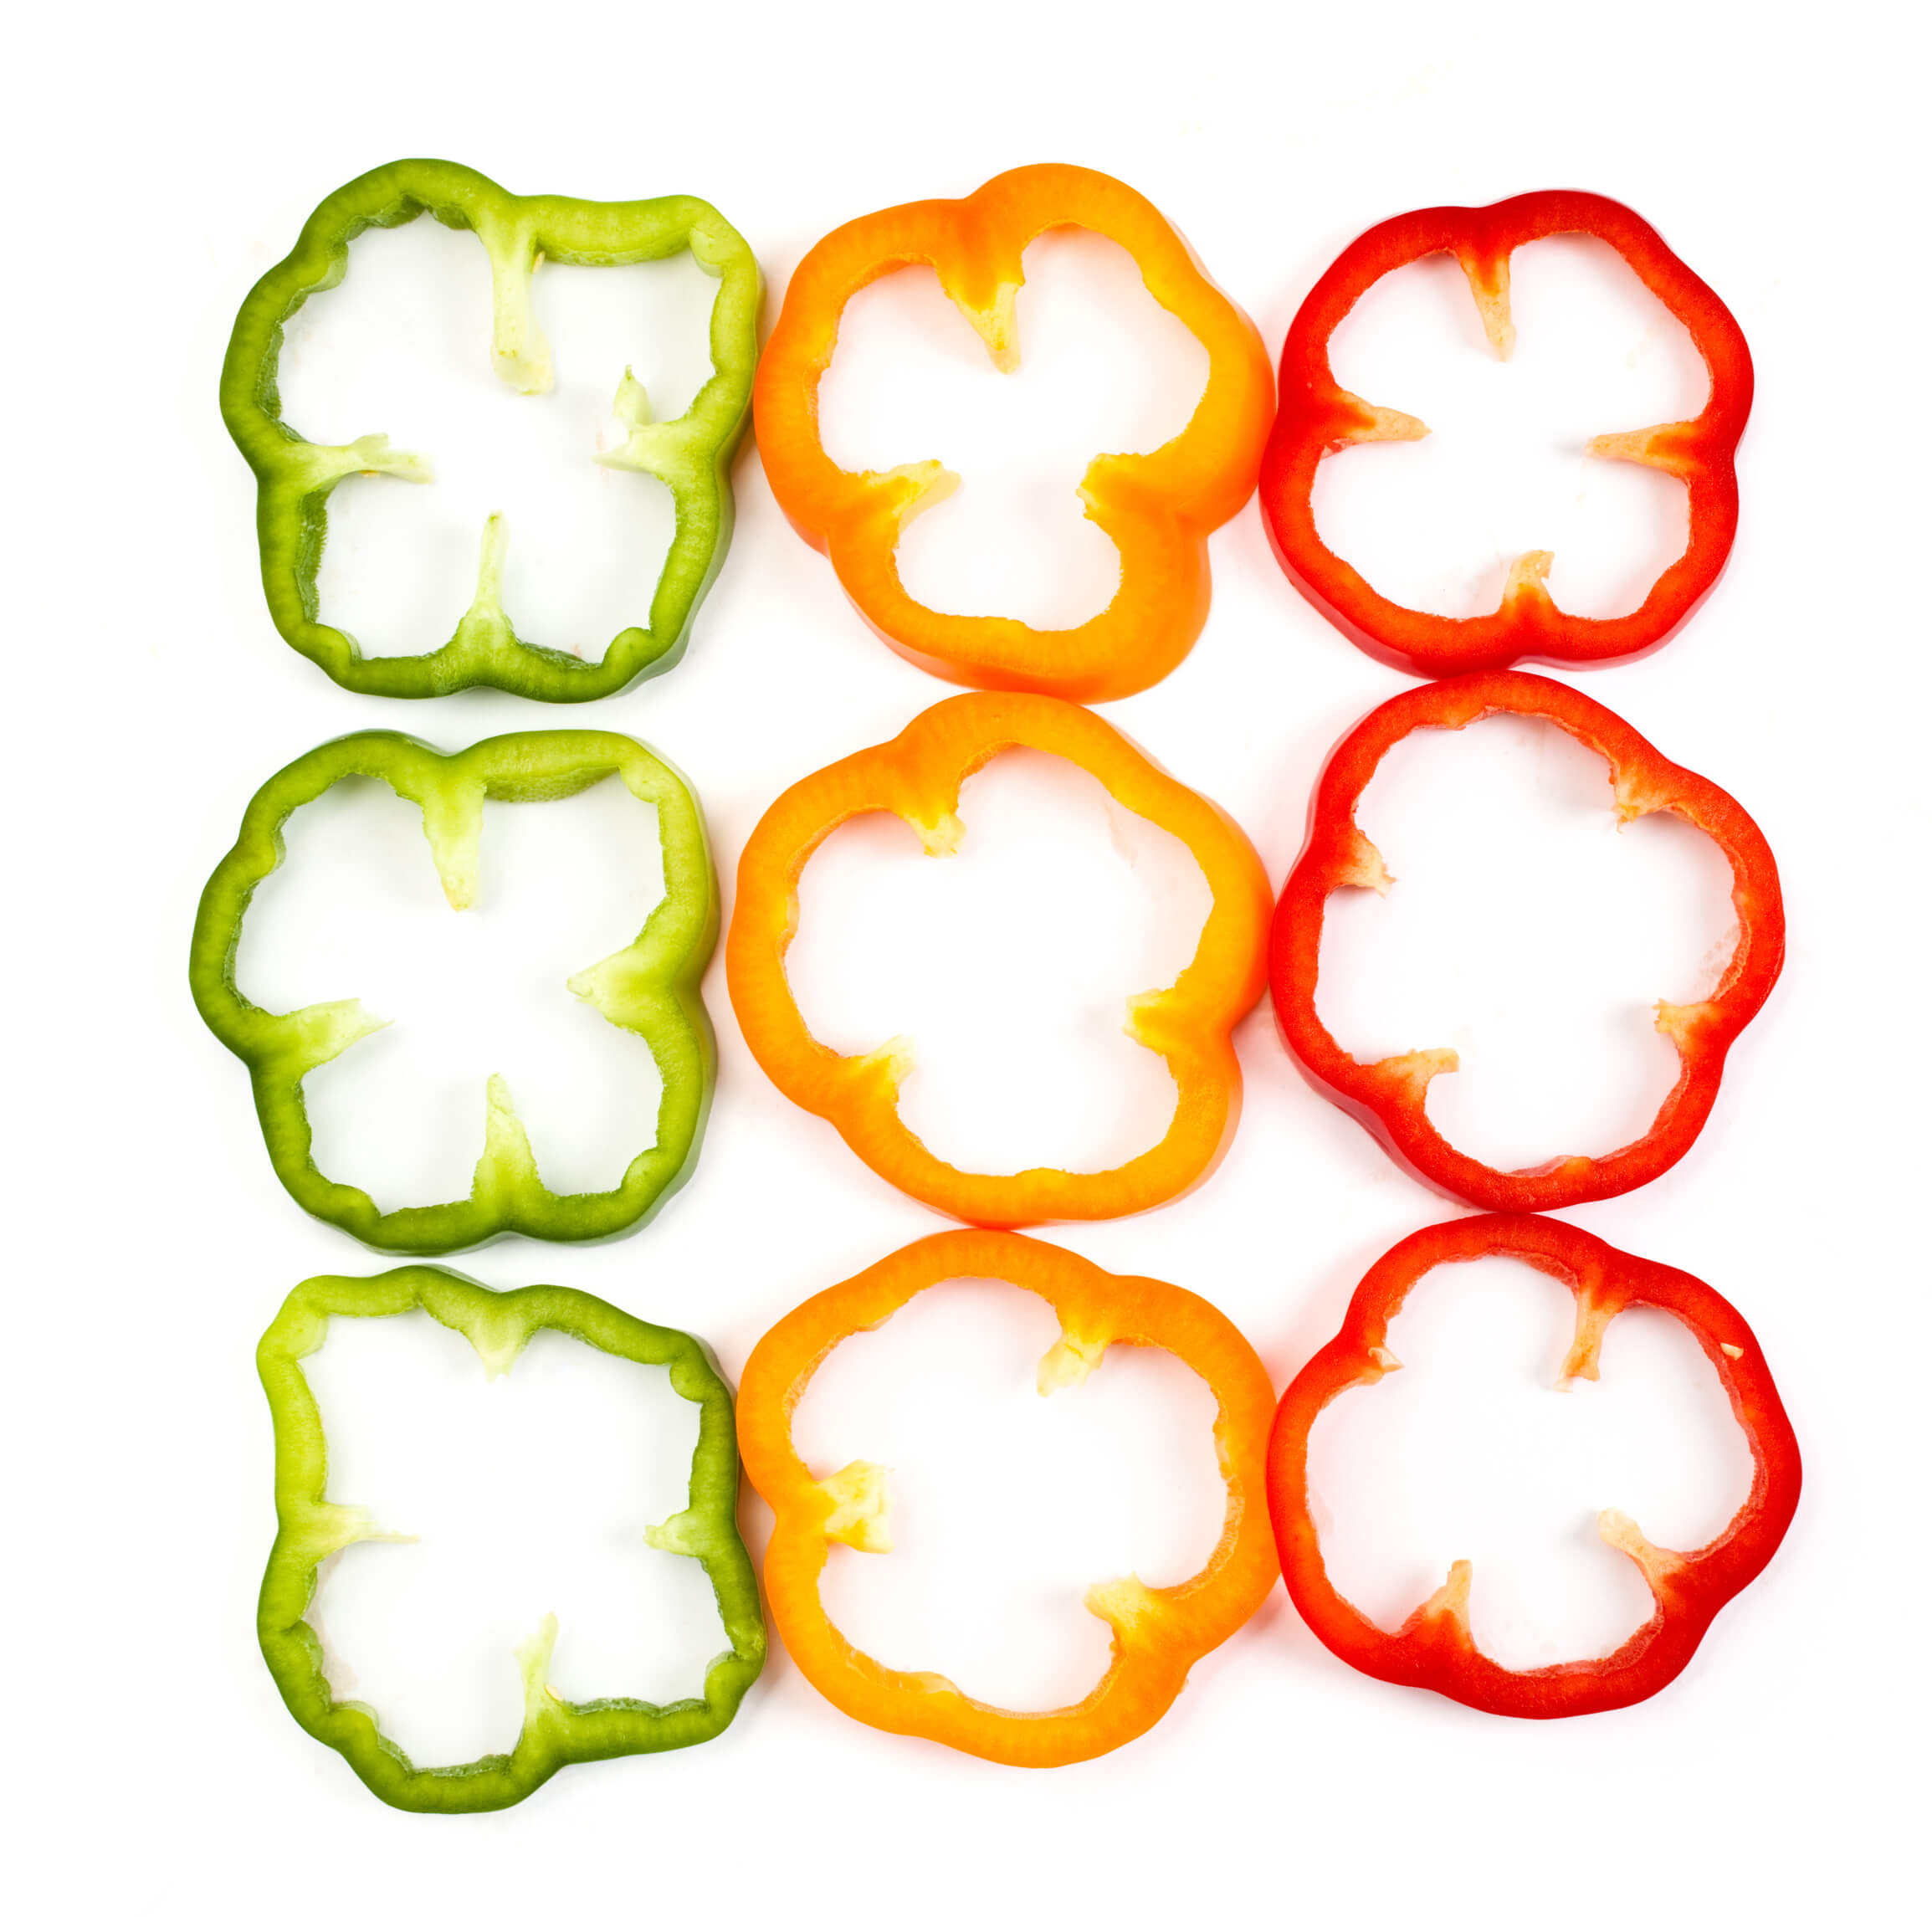 How to slice a bell pepper